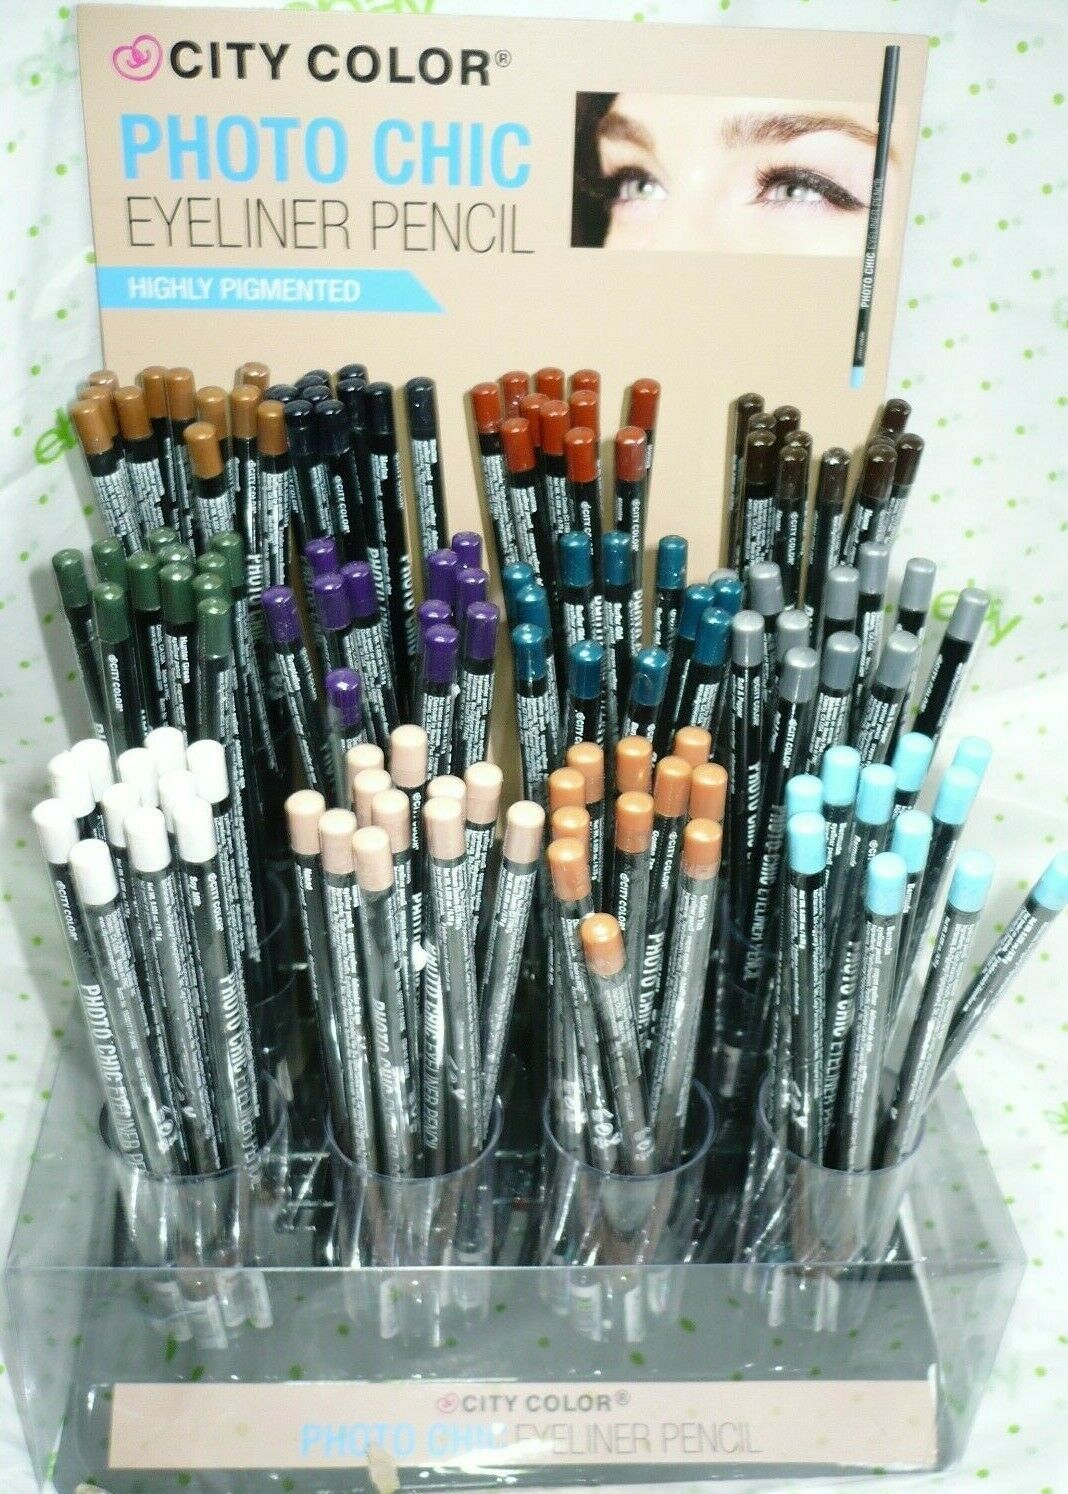 City Color Photo Chic Eyeliner Pencils You Get All 12 Colors Full Size New